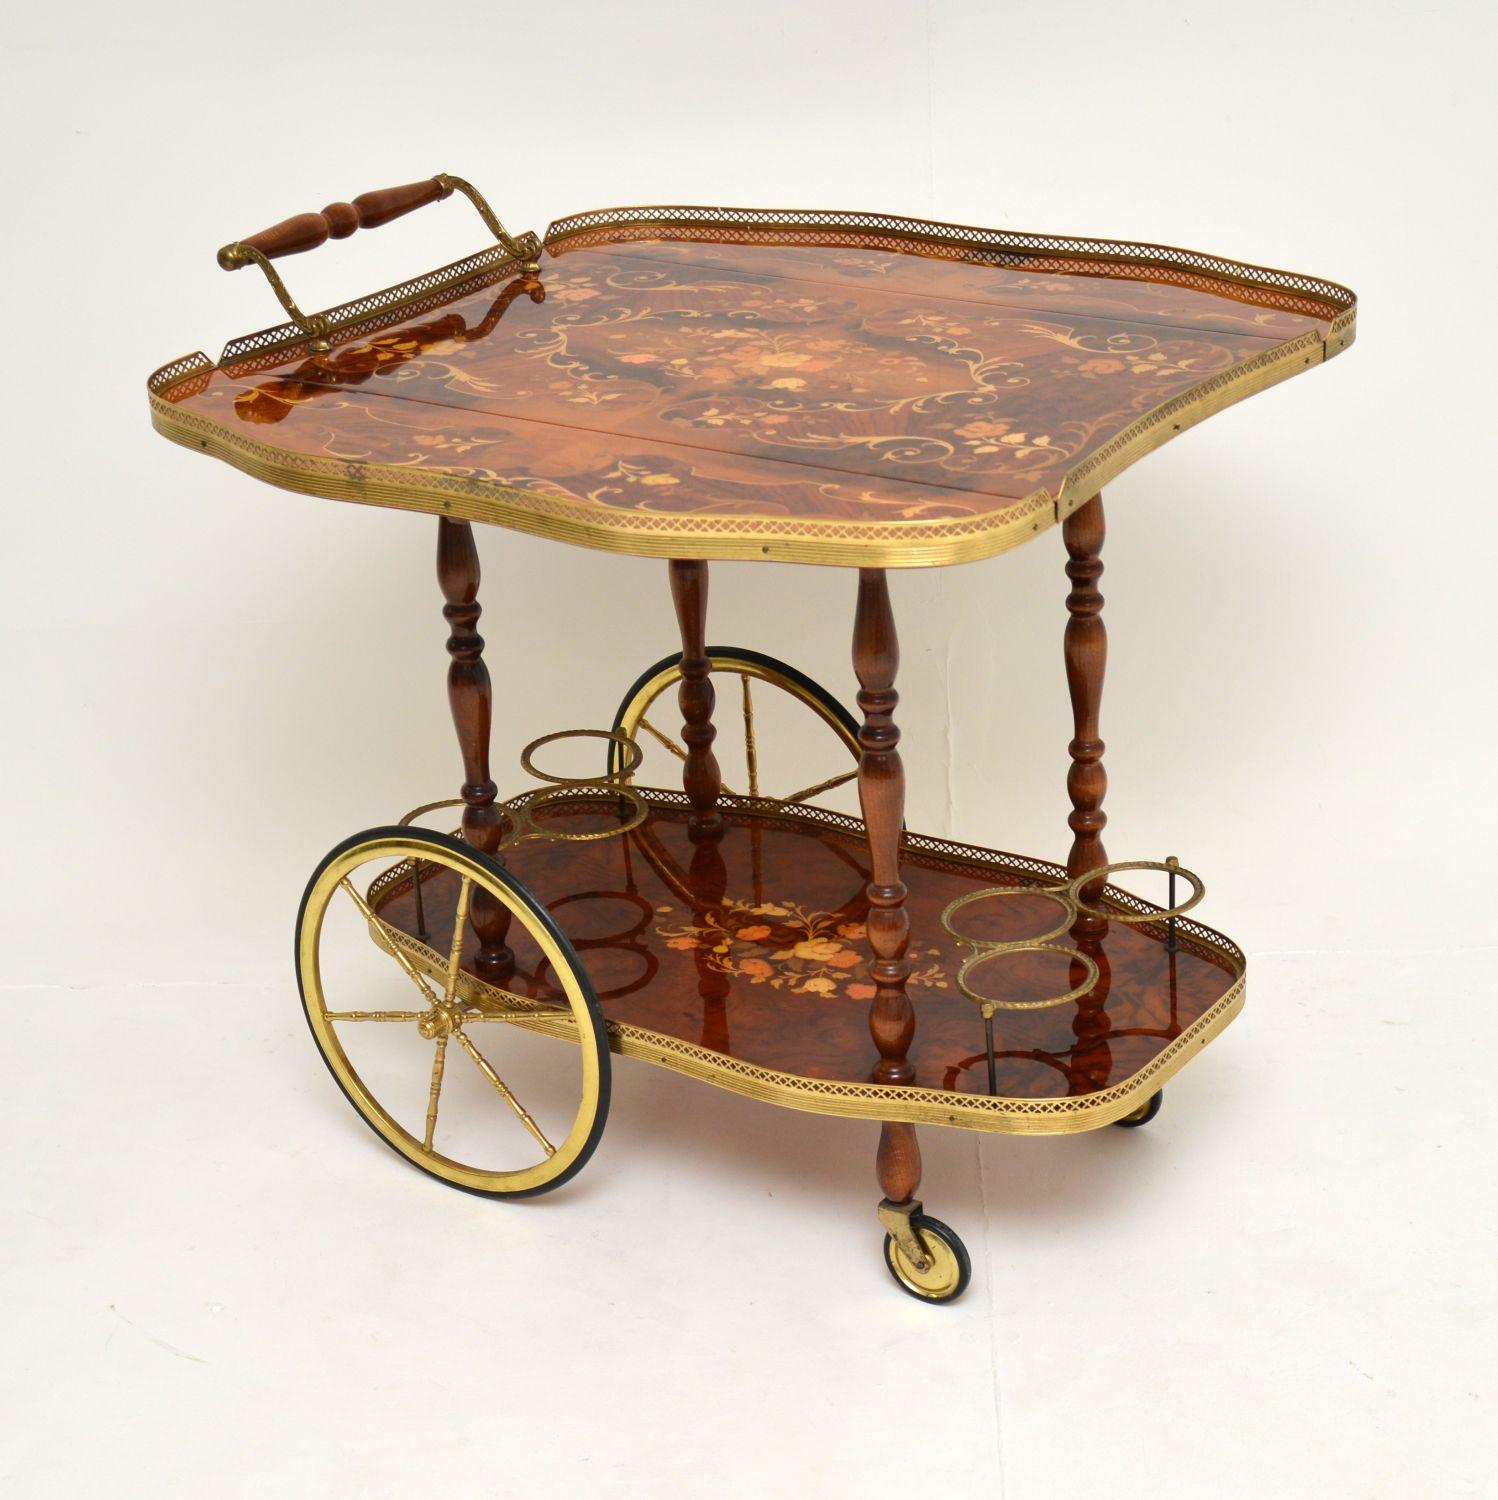 A gorgeous vintage Italian drinks trolley, beautifully made from walnut and brass. This was made in Italy, it dates from the 1950-1960’s.

It is of excellent quality, the top has an unusual drop leaf design and opens out to create a very large